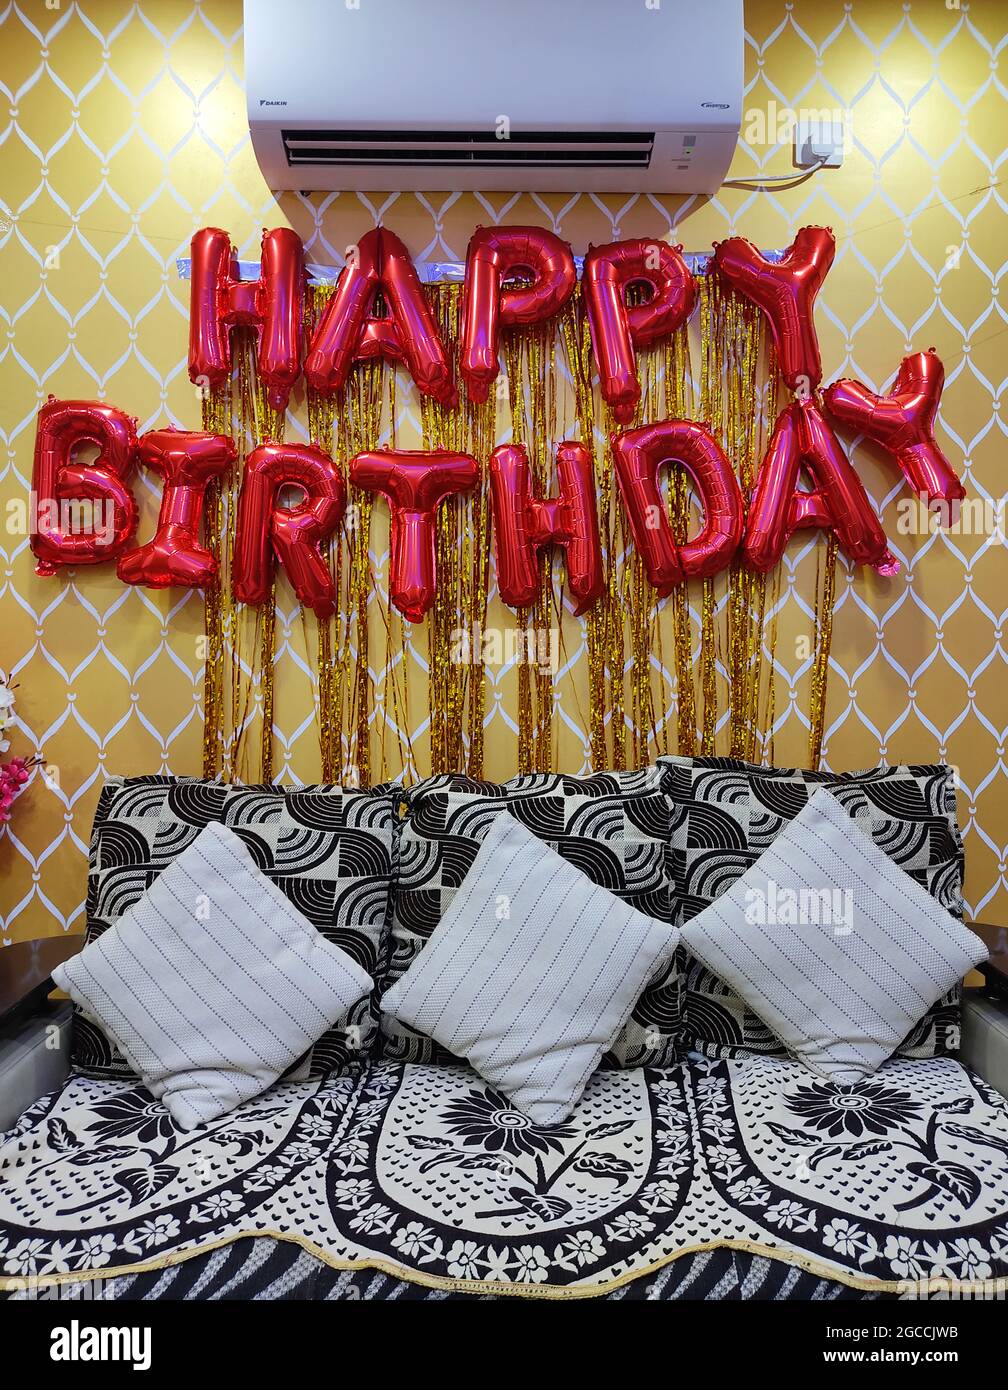 Happy Birthday Golden Balloon Hanging Banner on Wall. Birthday  Party Decorations. Home Interior. Stock Photo